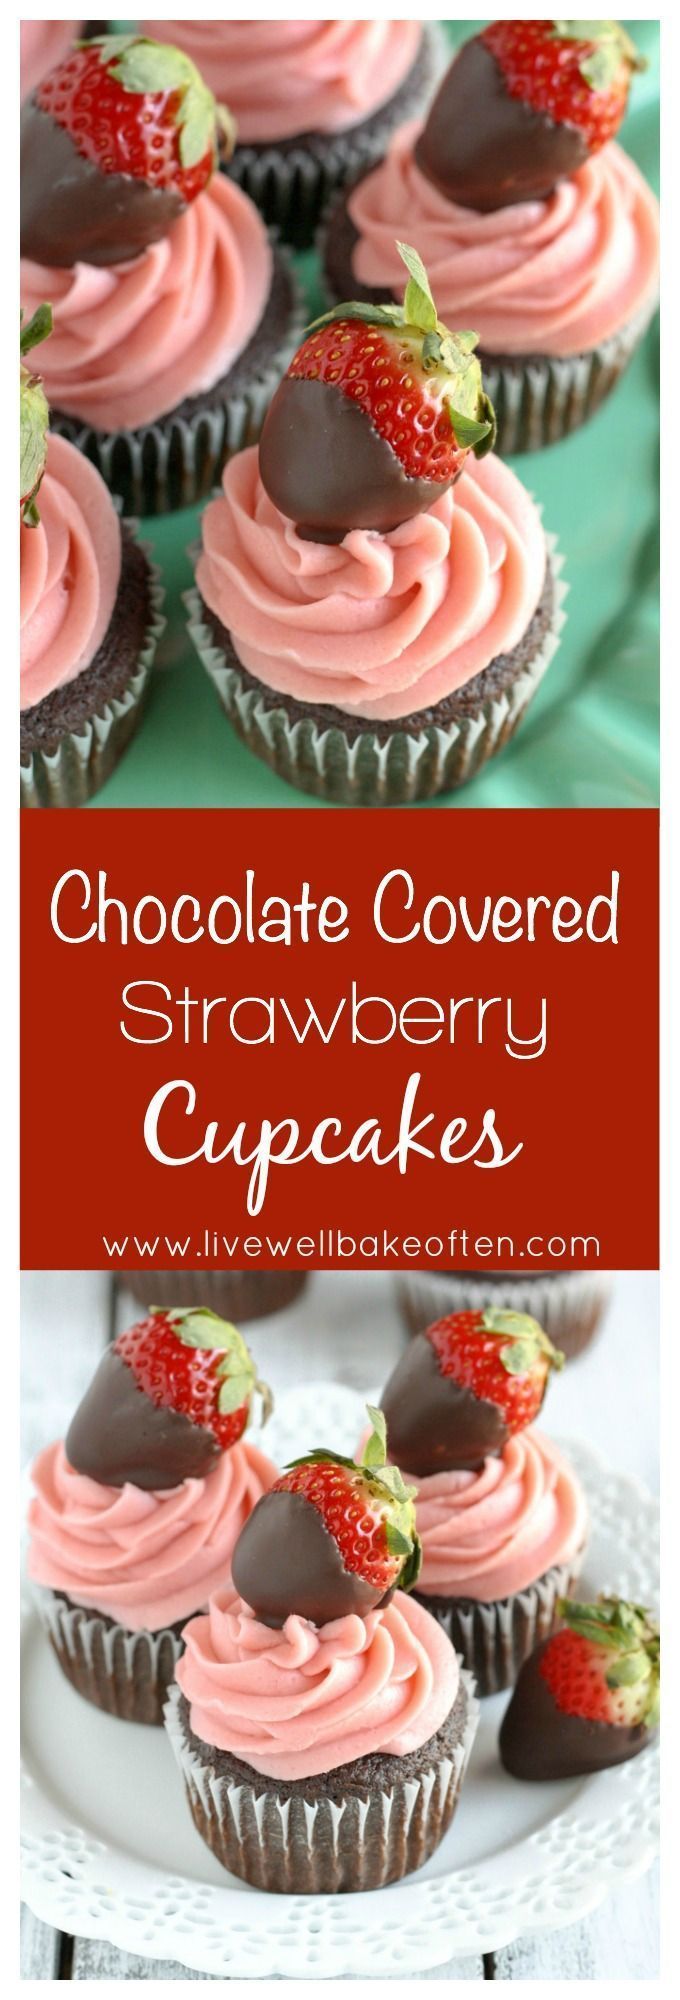 Moist chocolate cupcakes topped with a strawberry buttercream frosting and chocolate covered strawberries!